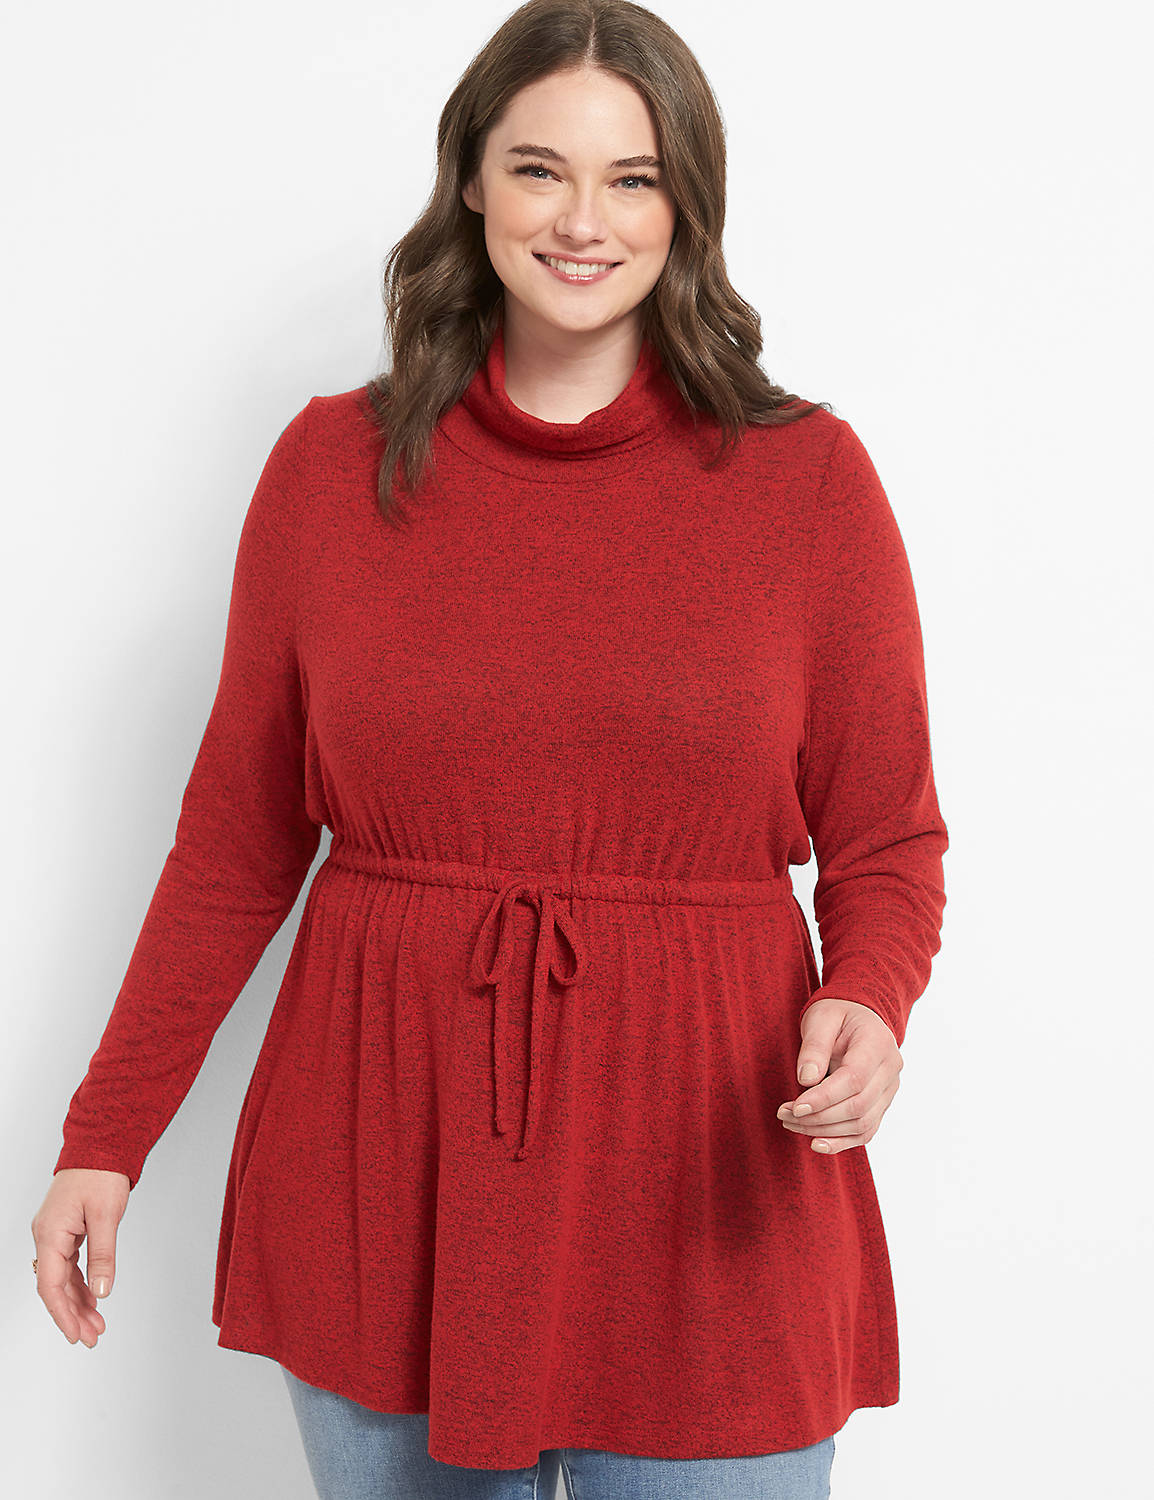 Long Sleeve Funnel Neck Drawcord Tunic In Solid Hacci 1123736:PANTONE Haute Red:10/12 Product Image 1